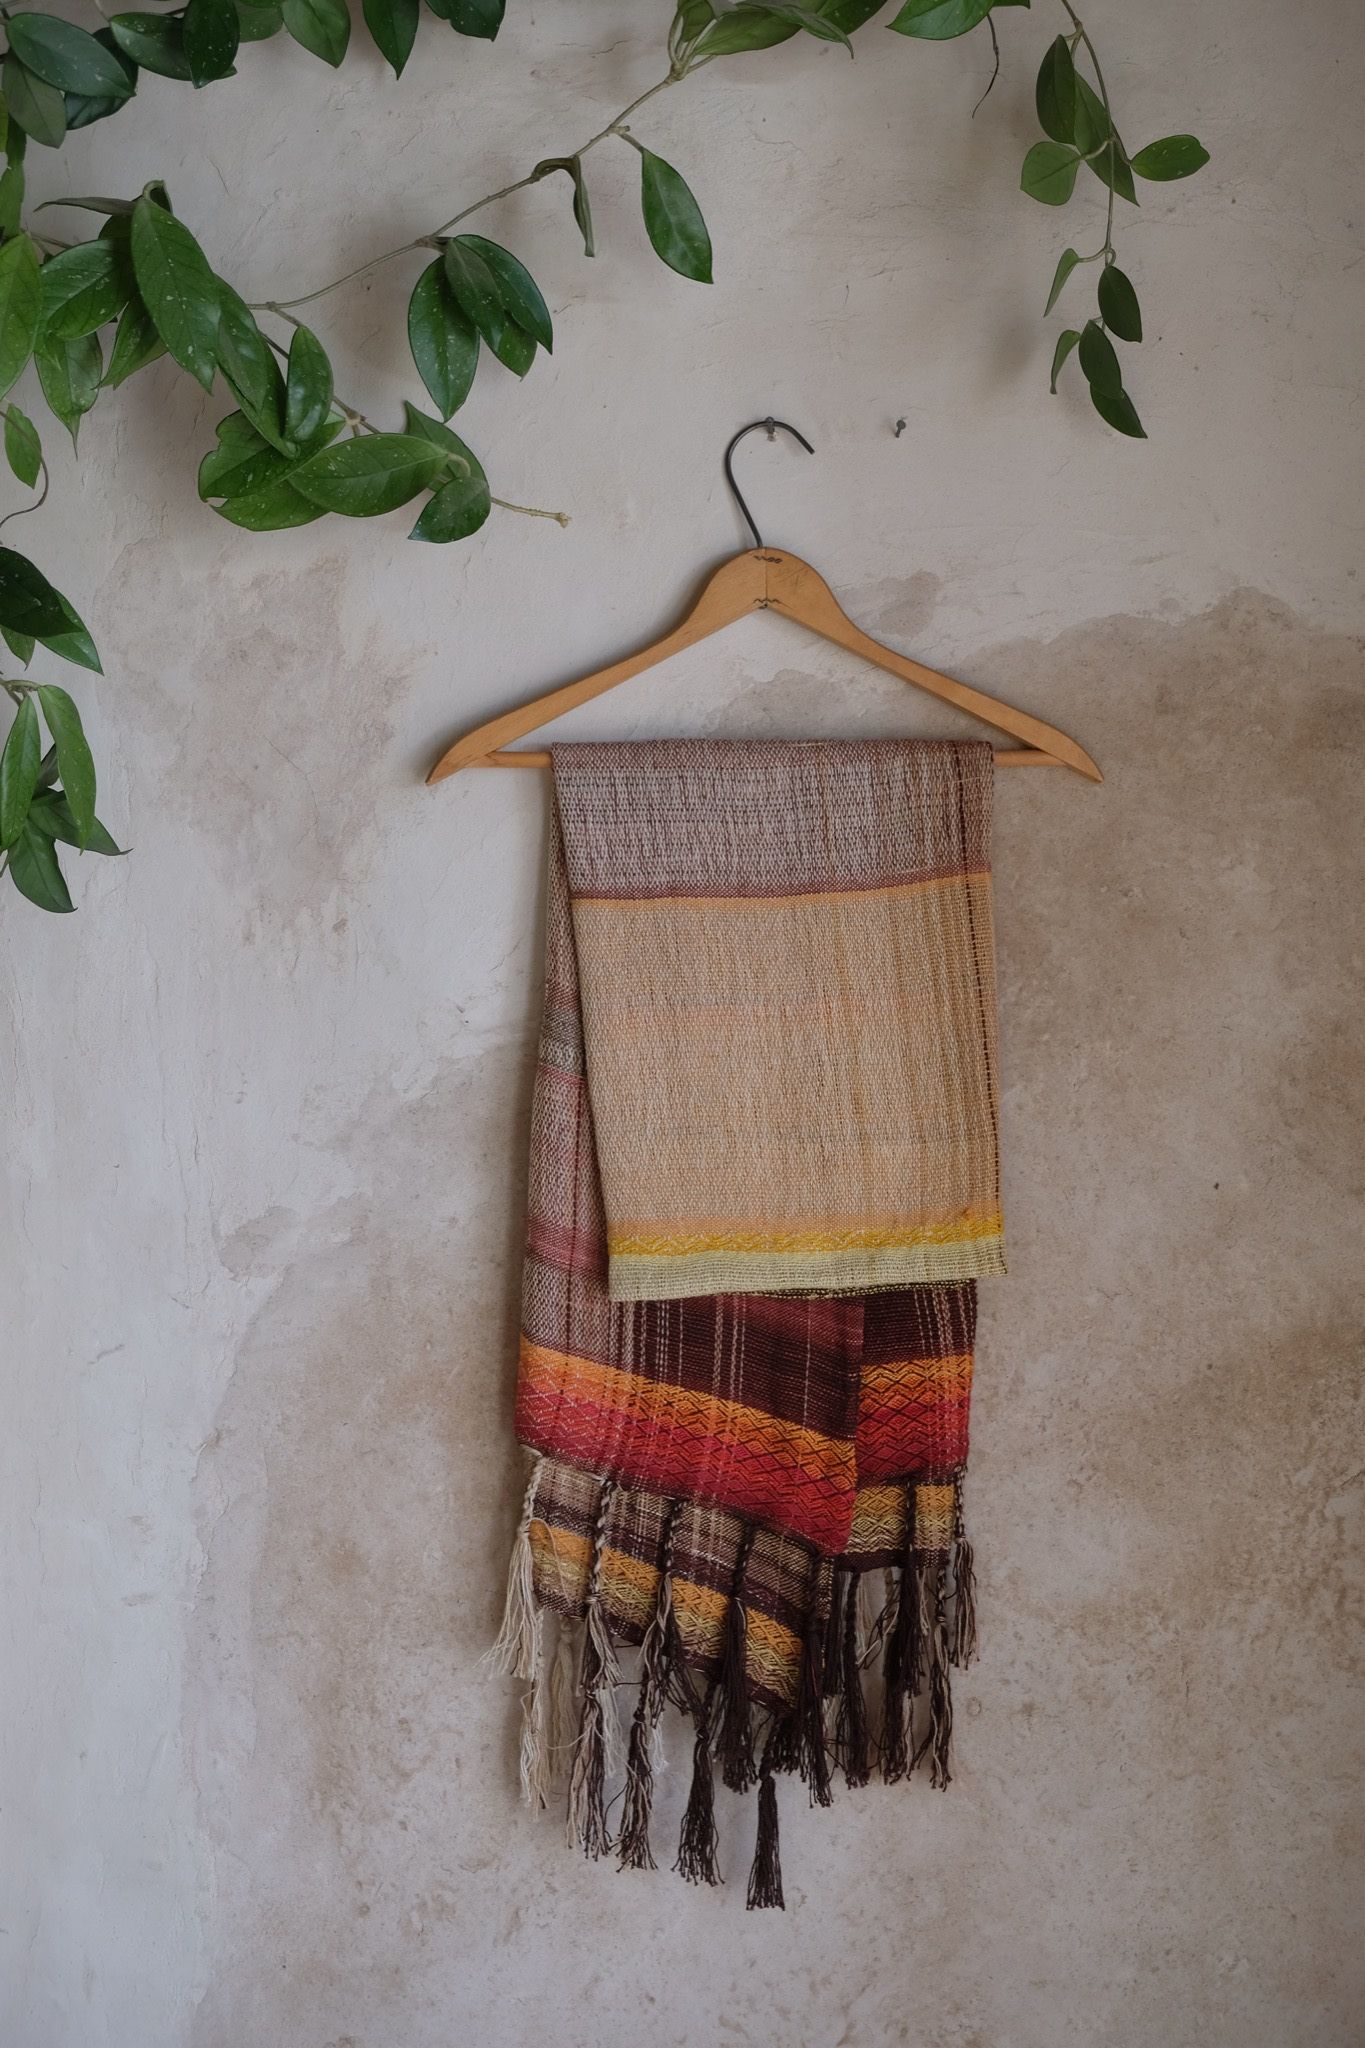 Handwoven red, orange, yellow, brown and white scarf on a hanger on a white mud wall